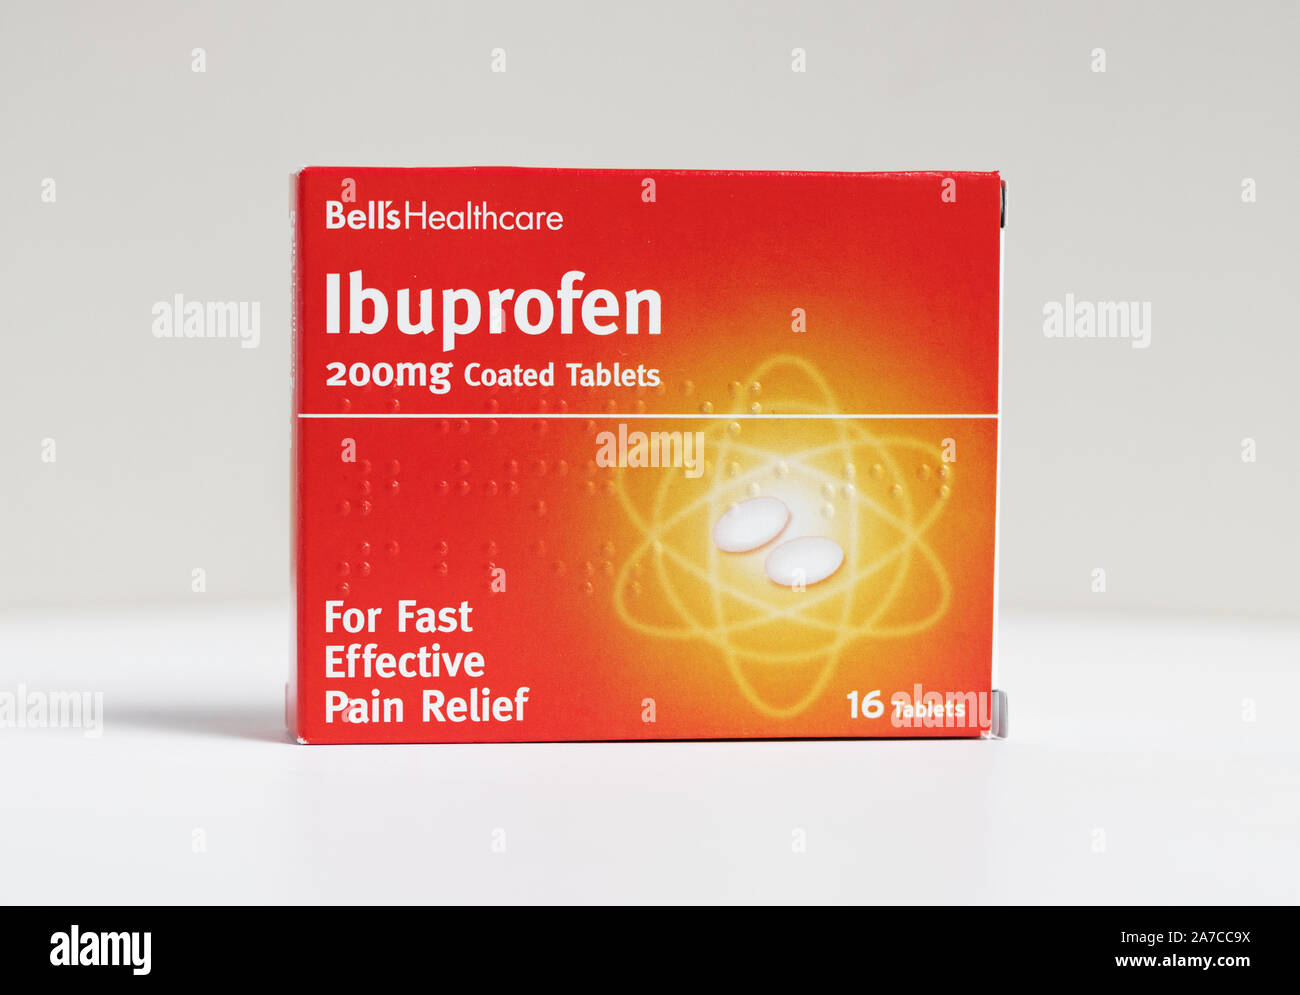 London / UK - October 30th 2019 - Packet of Ibuprofen painkillers from Bell’s Healthcare, closeup with a shallow depth of field Stock Photo